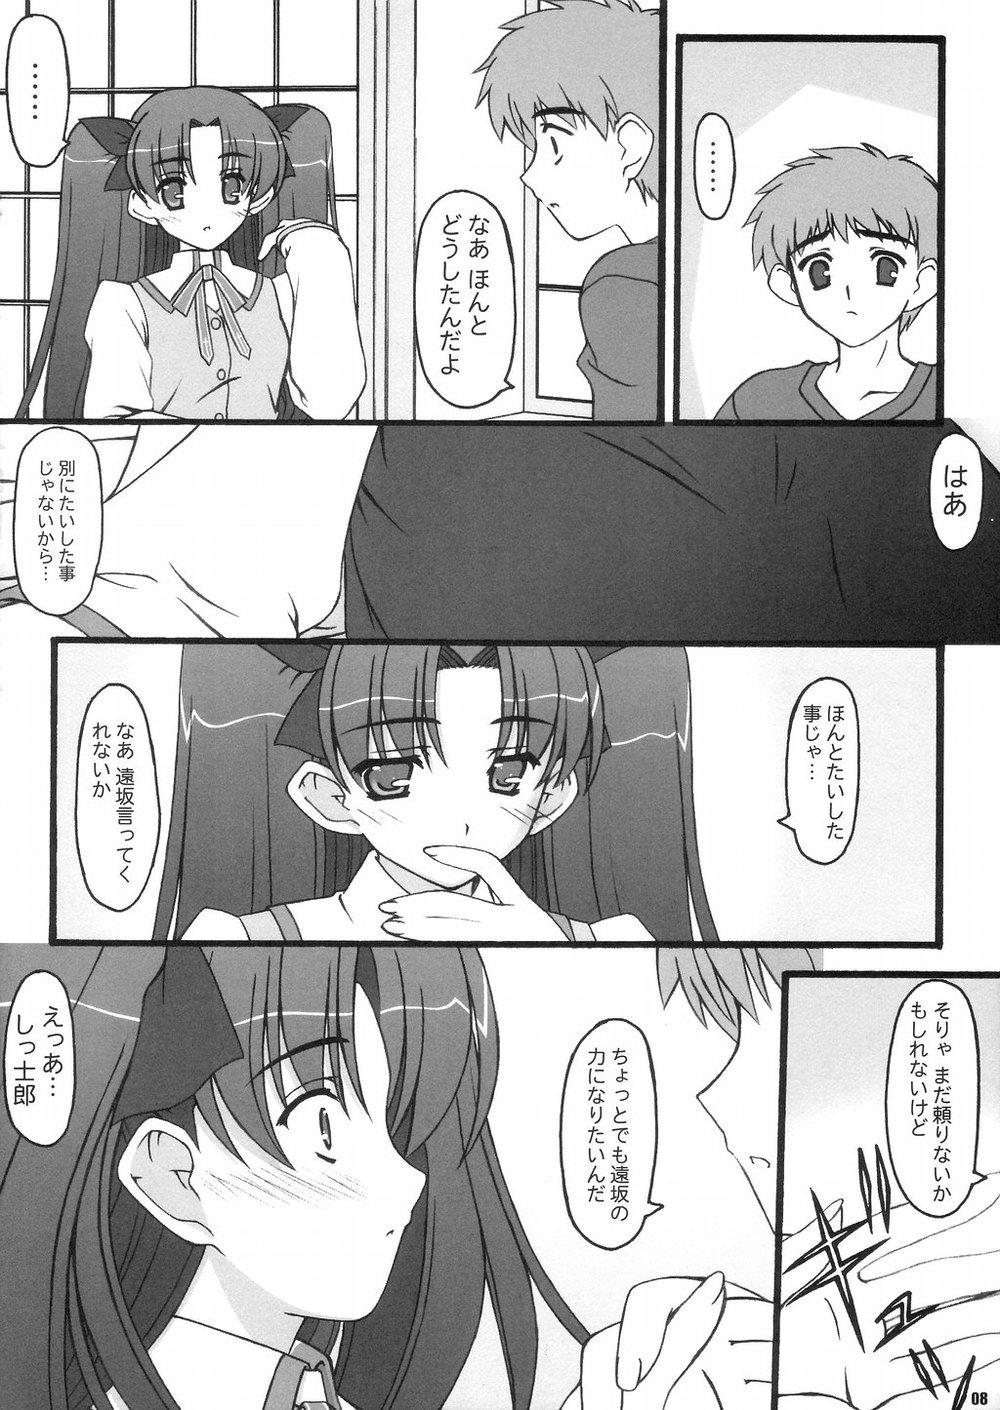 Couple Porn Fight - Fate stay night Rabo - Page 7